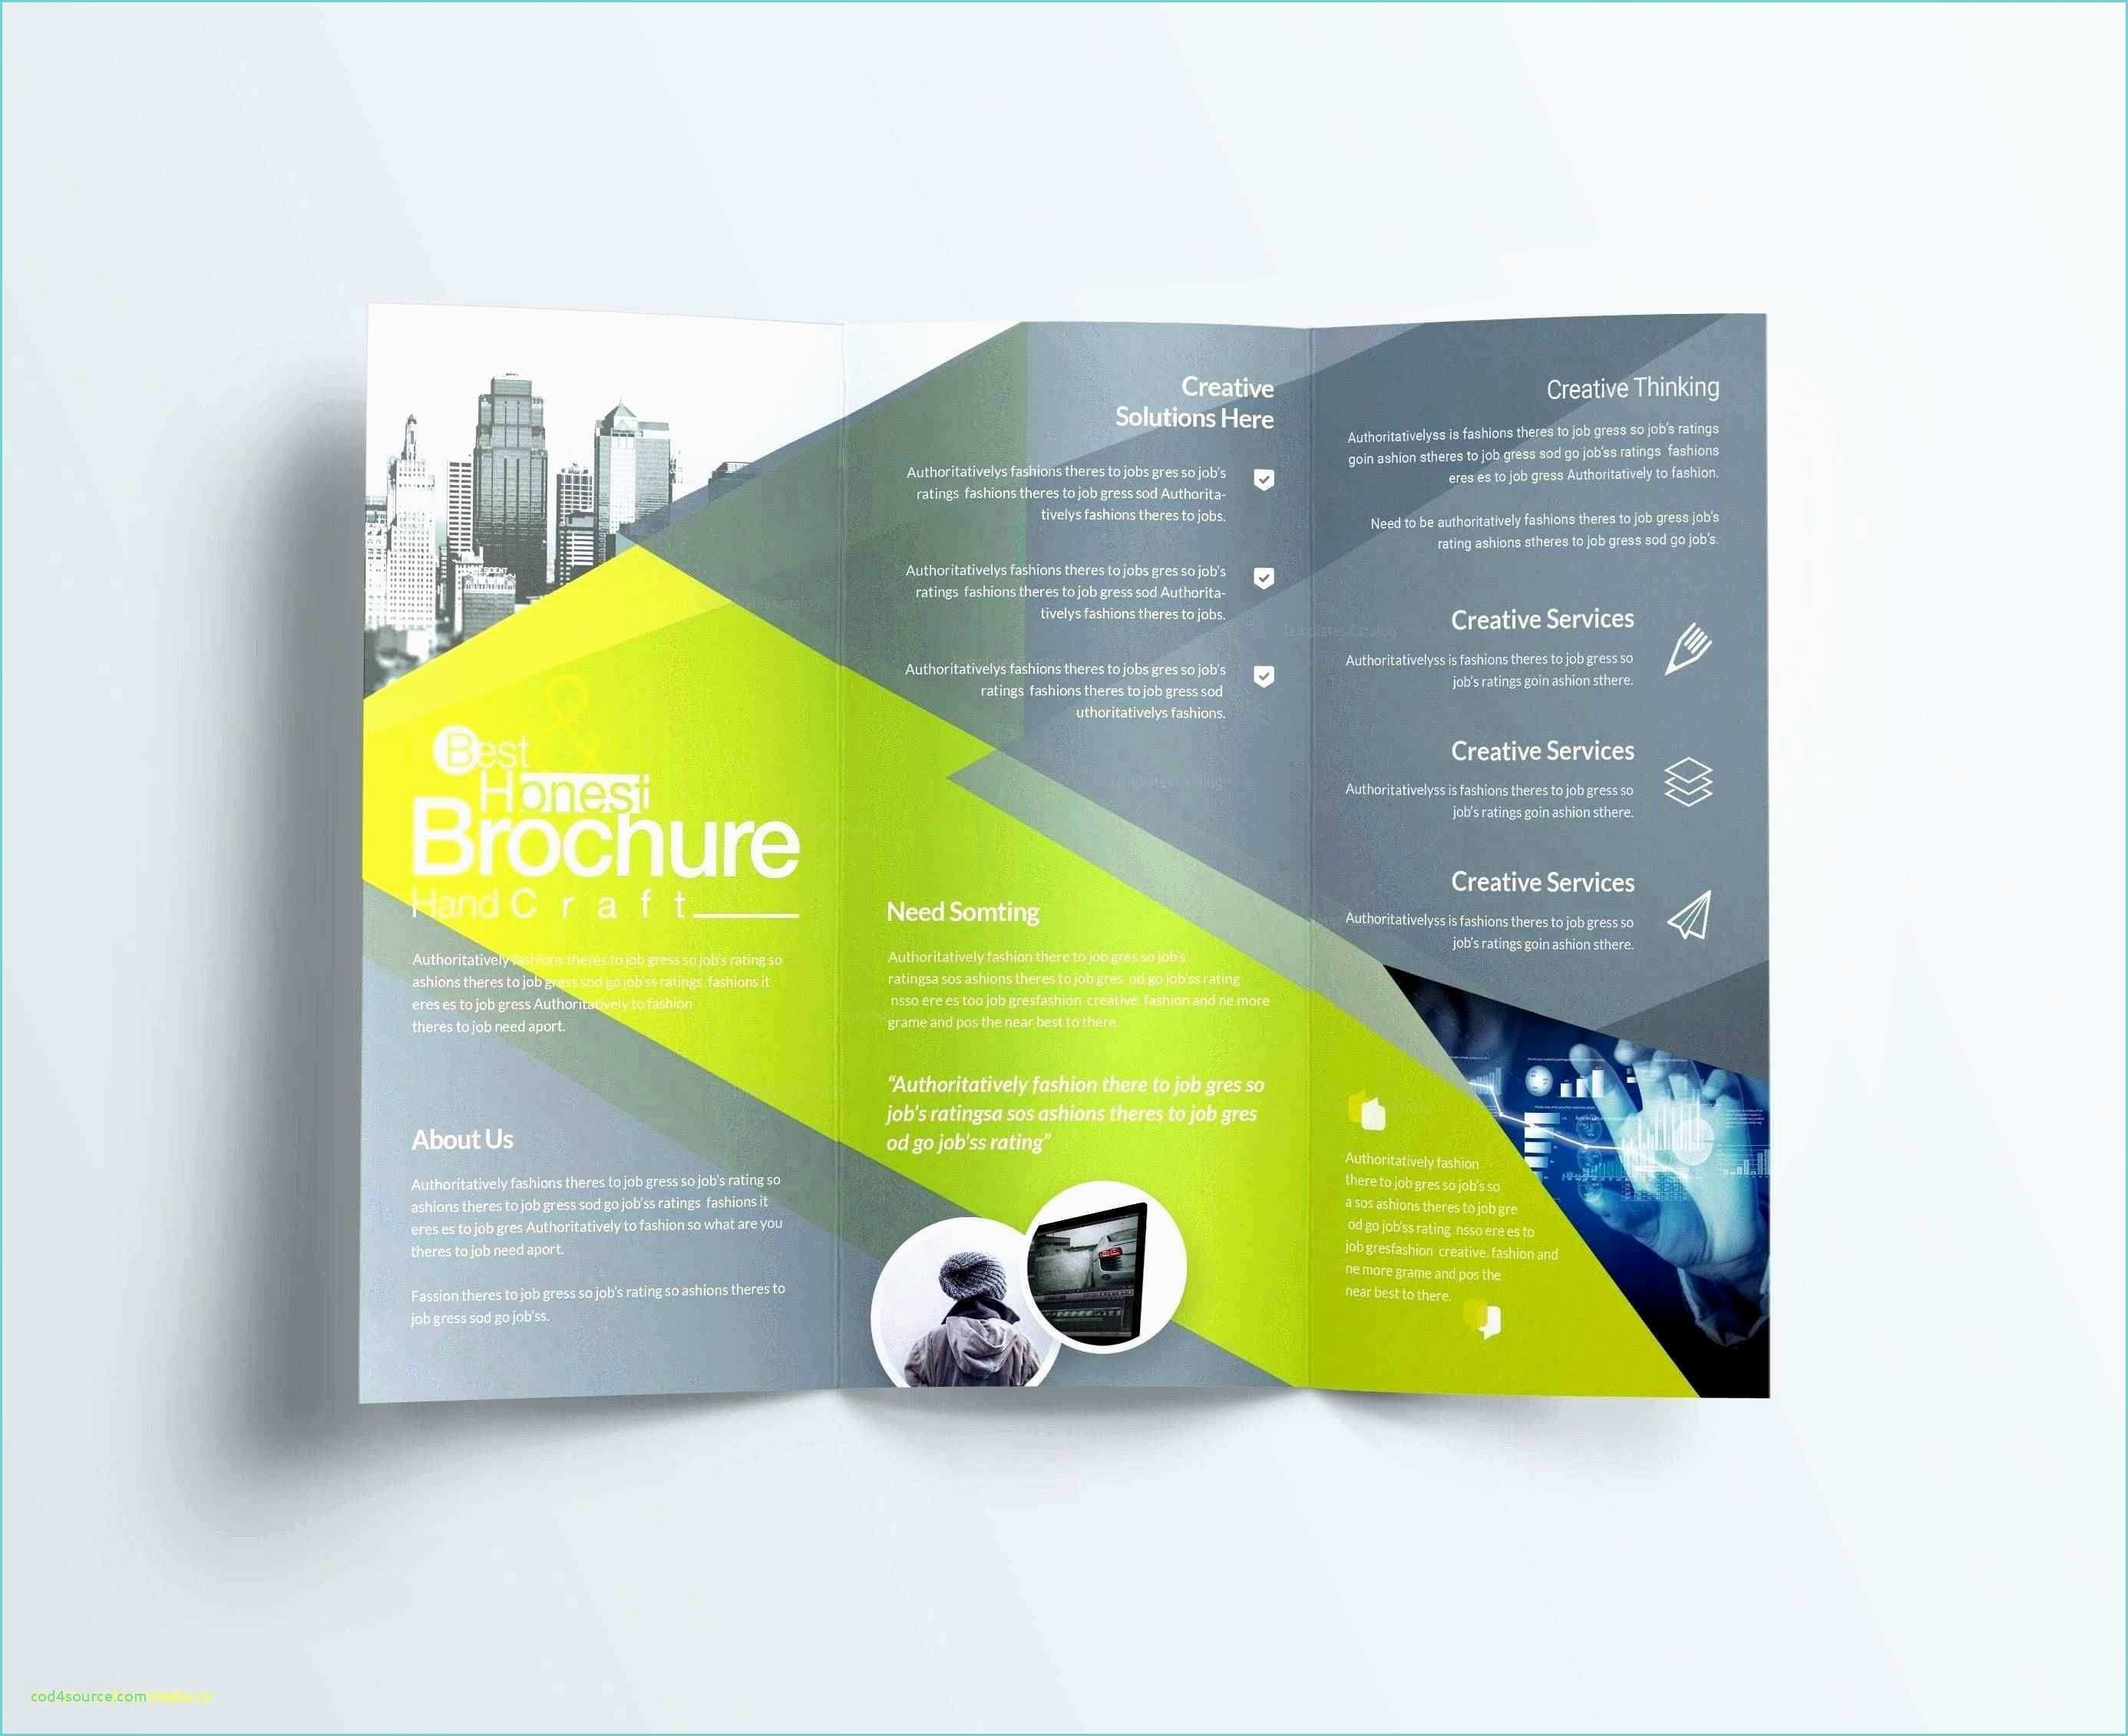 Pingprime Images On Letterhead Formats | Brochure Throughout Mac Brochure Templates